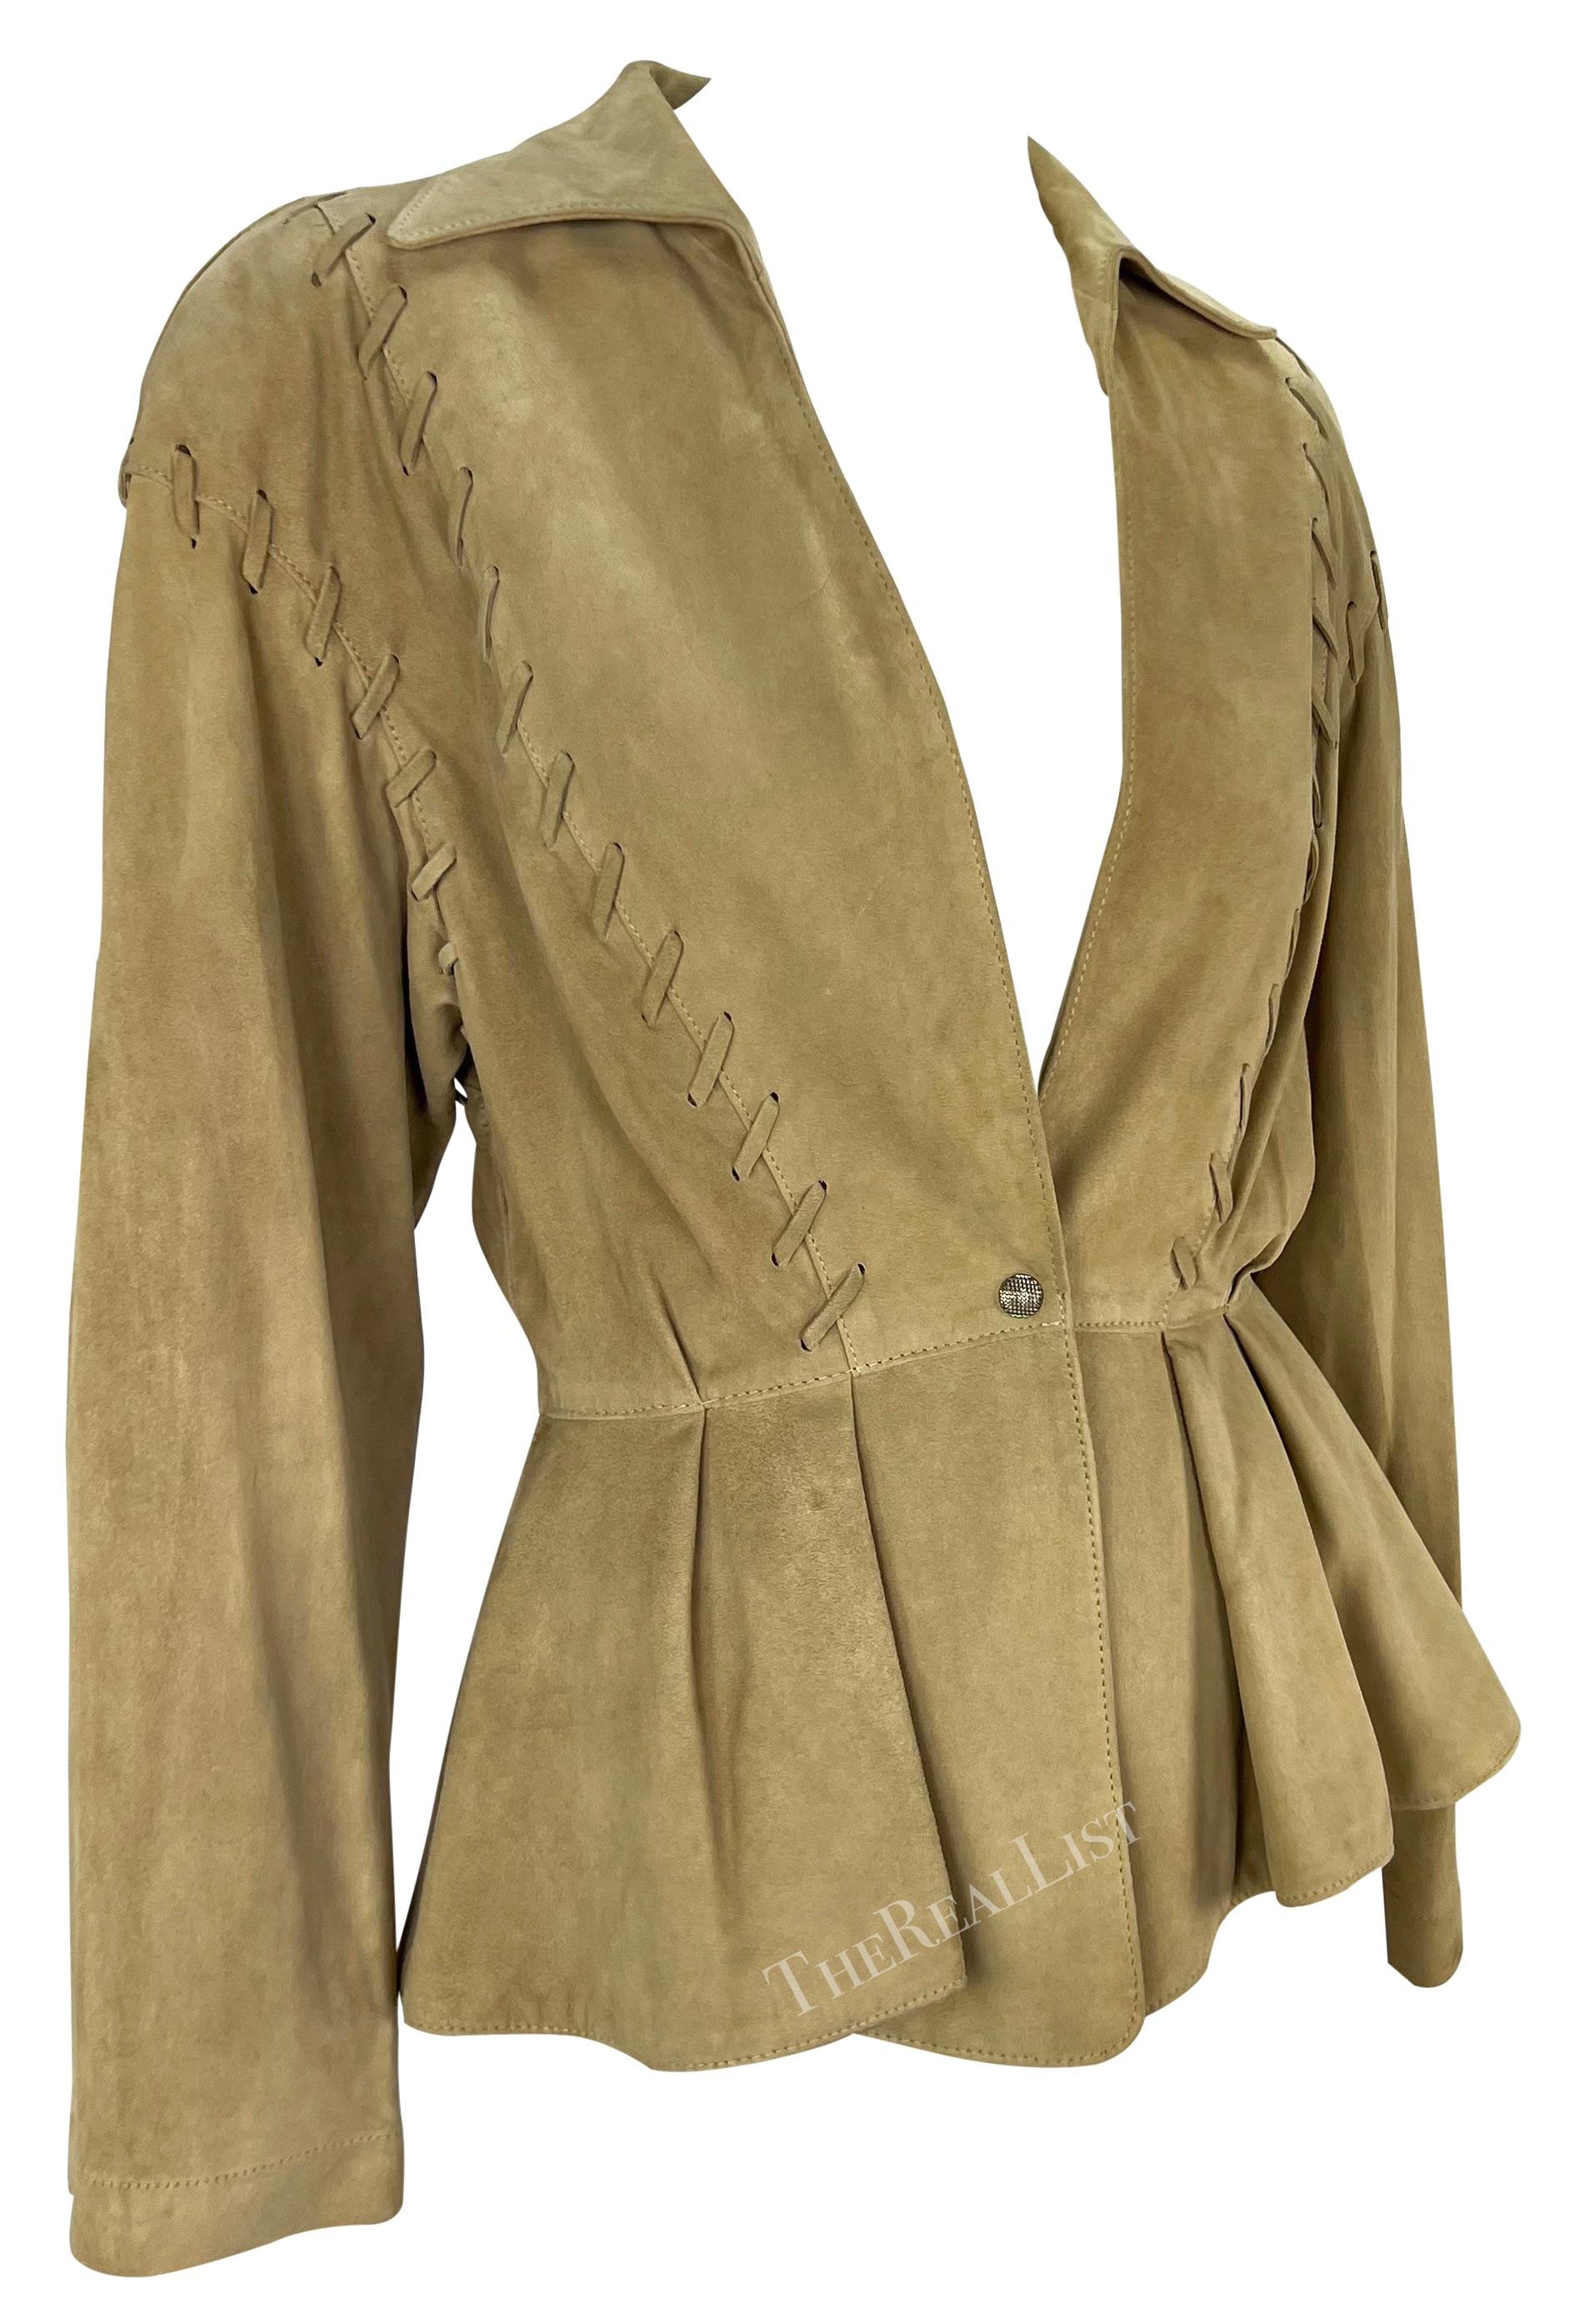 1990s Thierry Mugler Tan Suede Leather Plunging Western Whipstitch Jacket For Sale 3